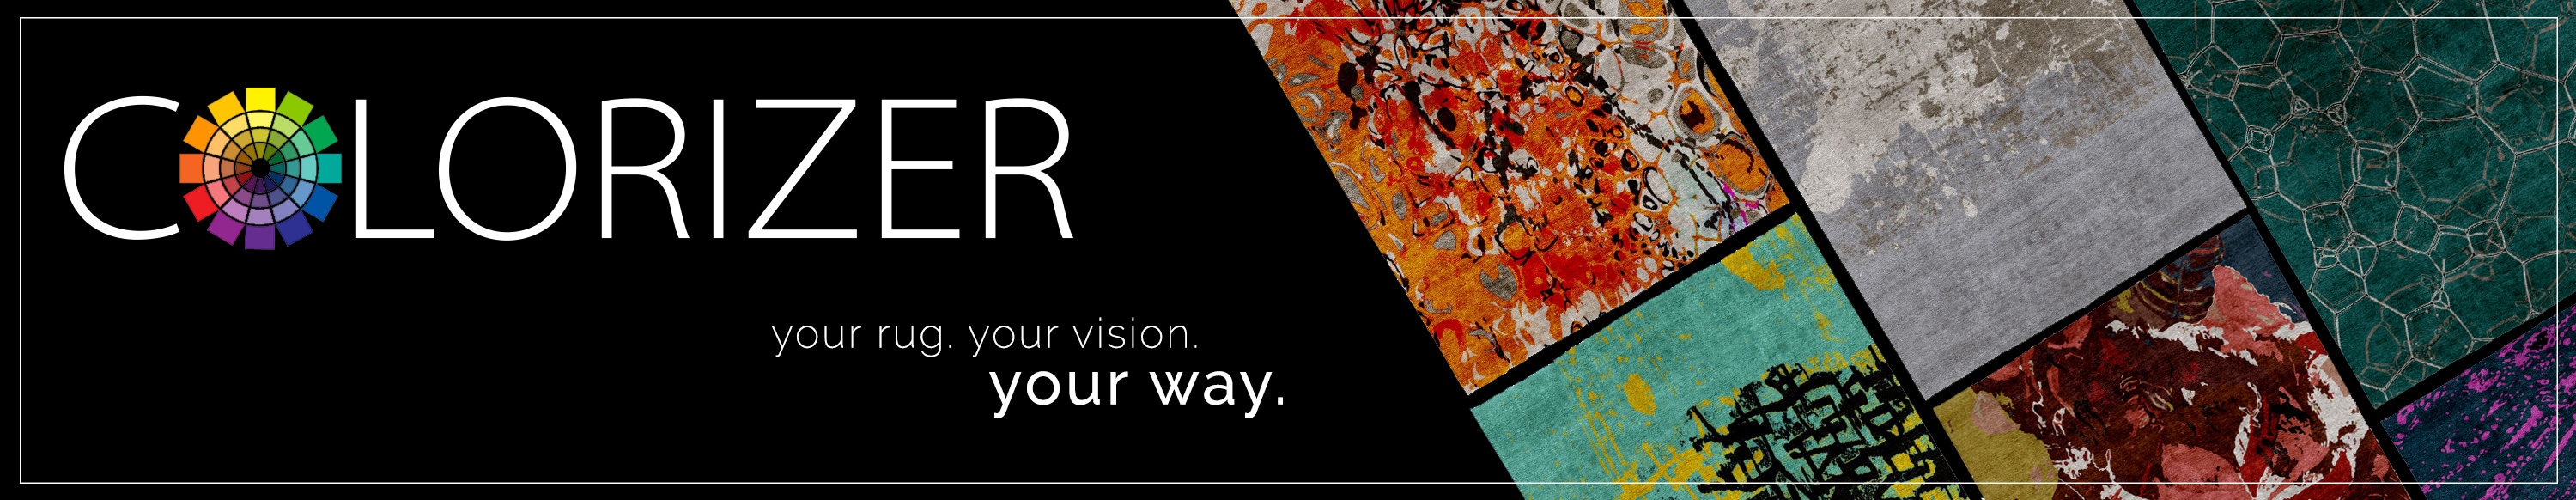 Custom color your own rug with our sophisticated Colorizer tool. Your rug, your vision, your way. Colorize your rug now!